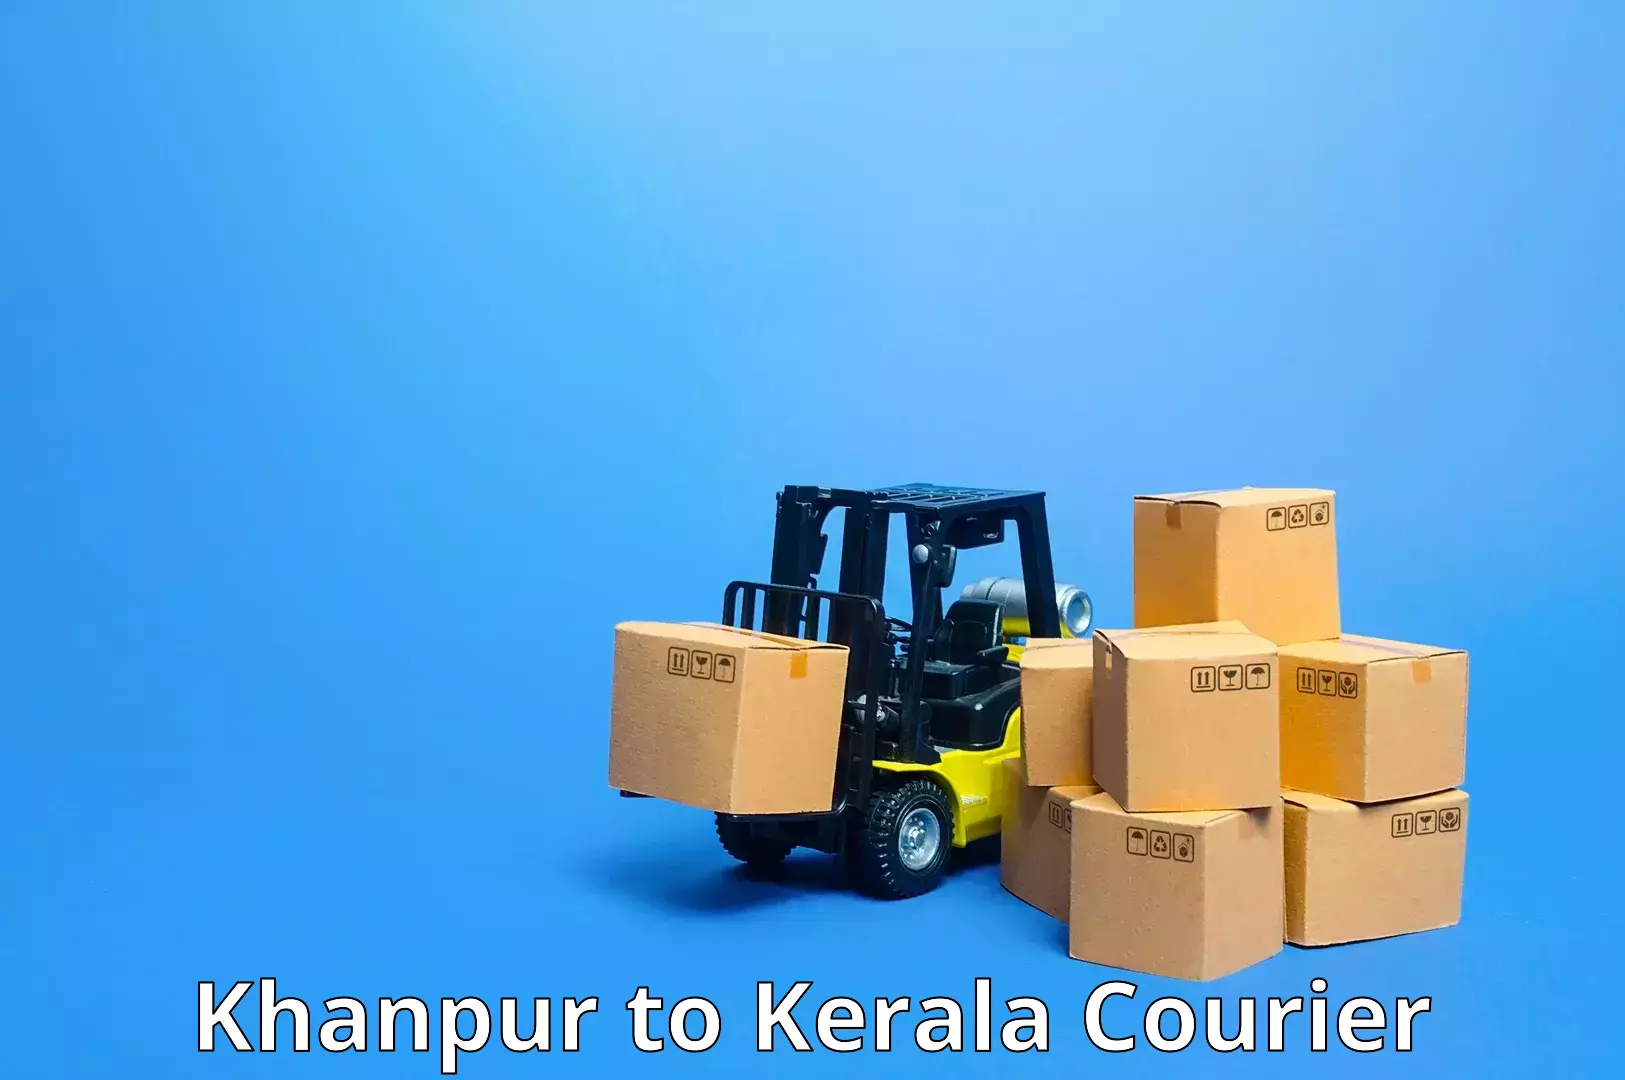 Comprehensive delivery network Khanpur to Karunagappally